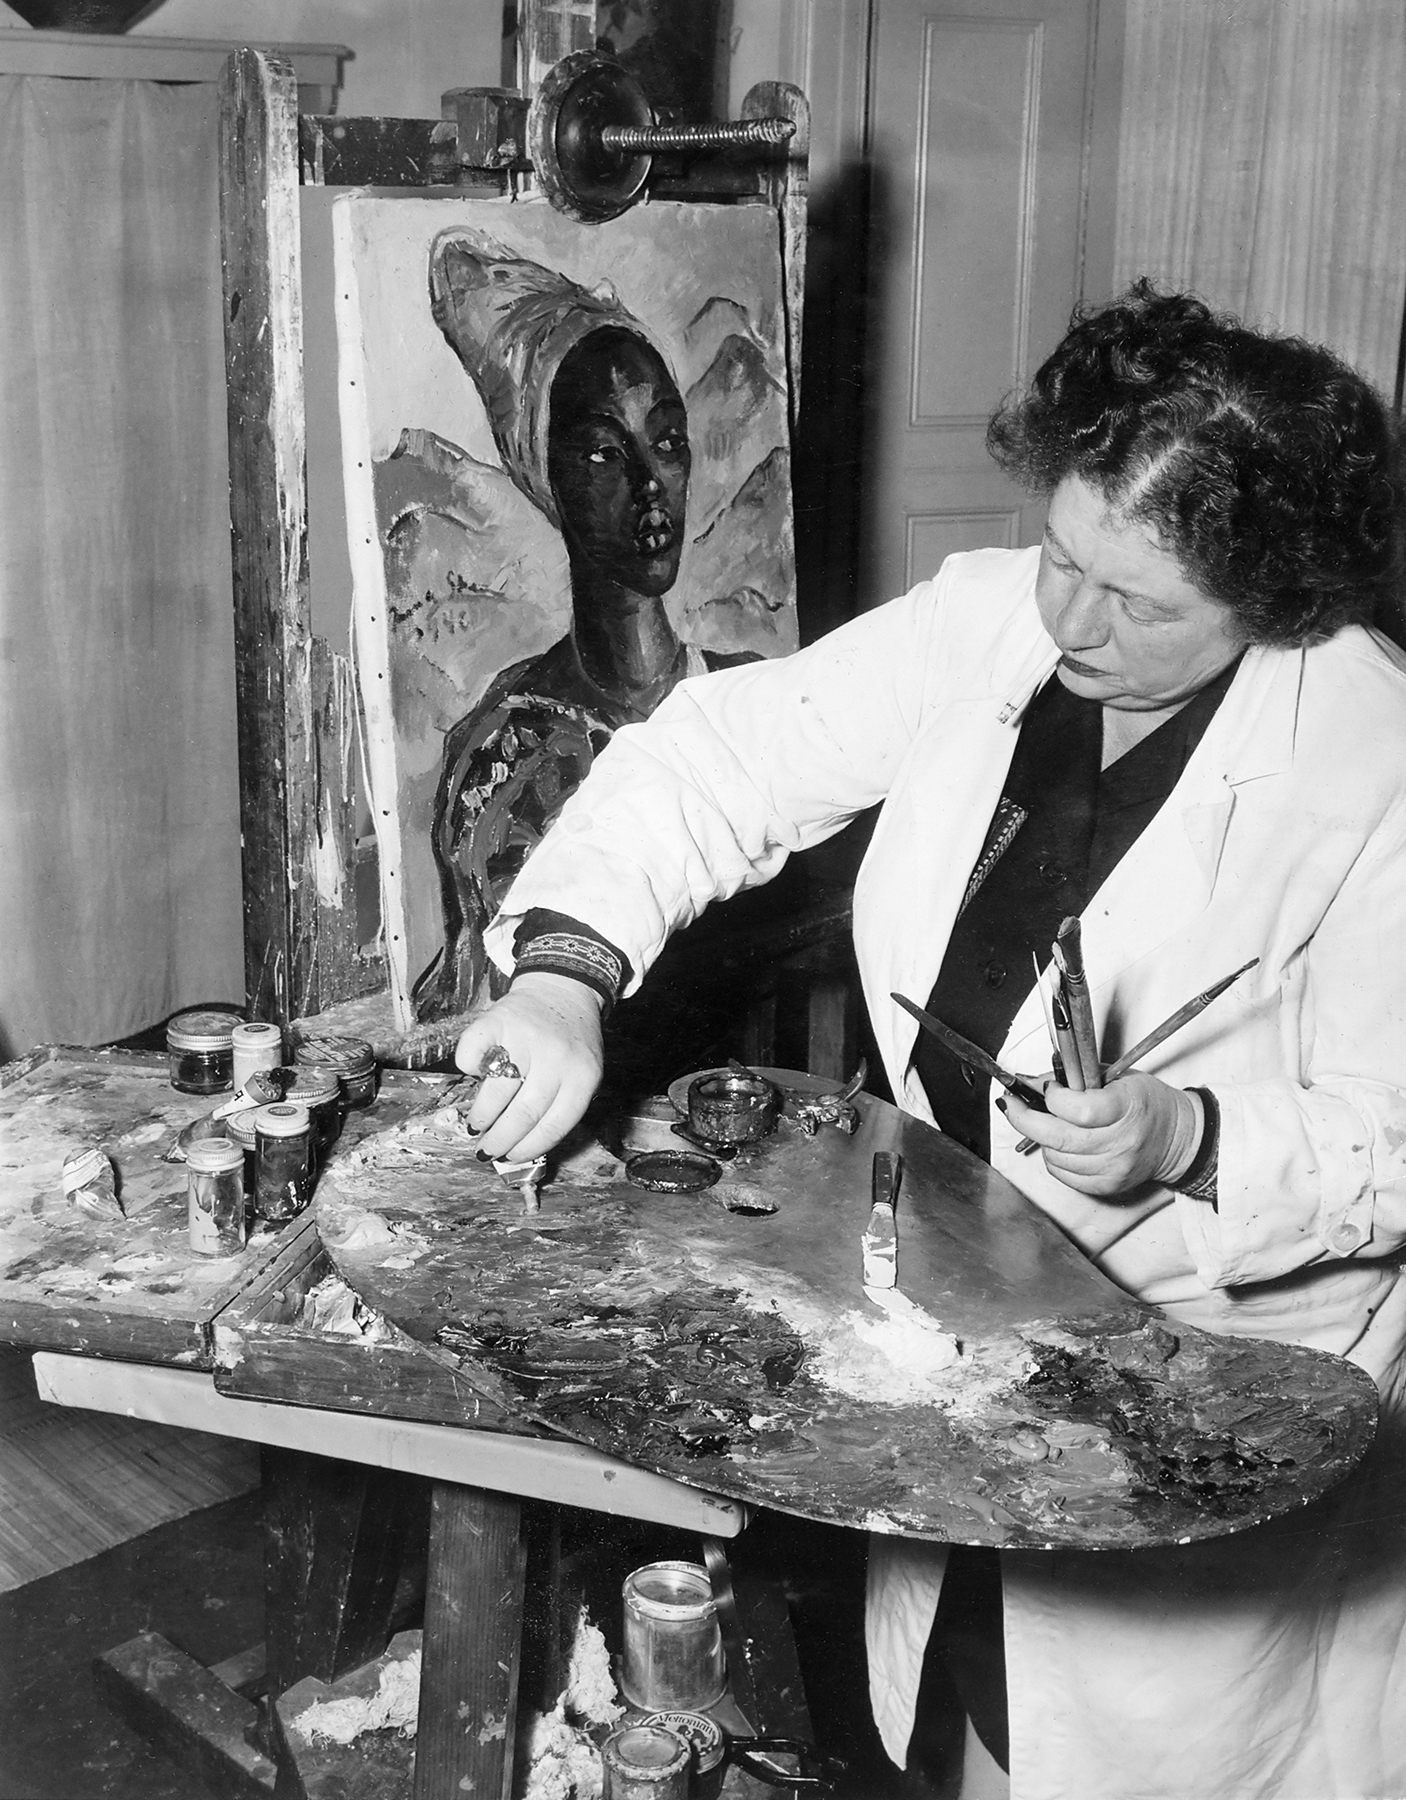 Irma Stern in her studio (1946). Exhibition reproduction. Courtesy National Library of South Africa, Cape Town (MSC31.5 Clippings, Folio 19)